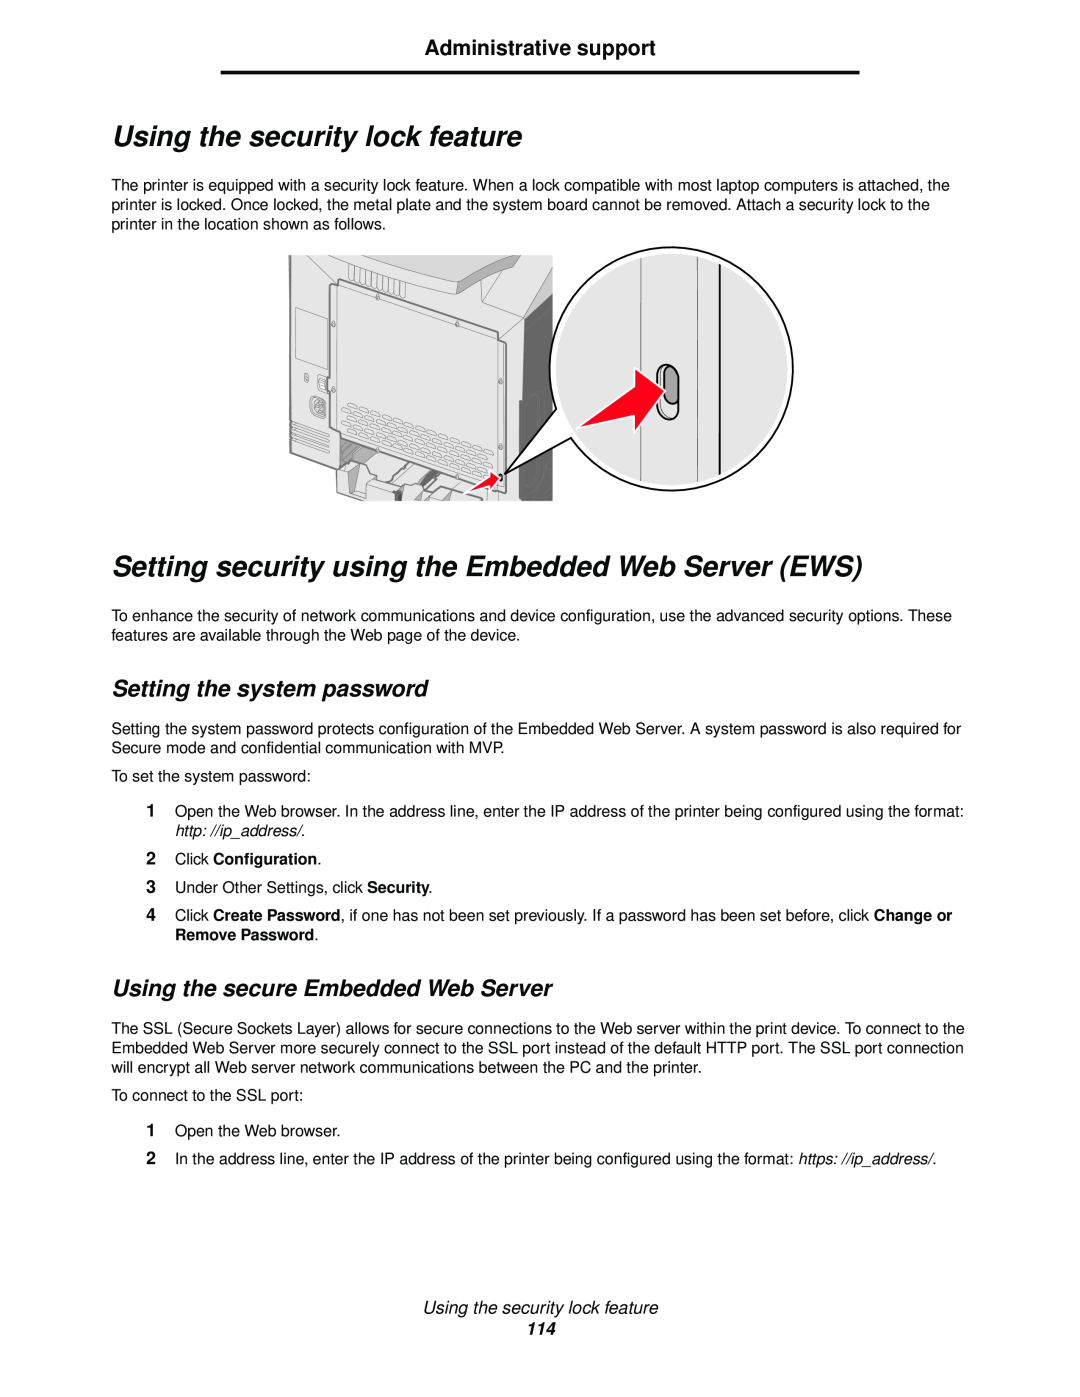 Lexmark C524 Using the security lock feature, Setting security using the Embedded Web Server EWS, Click Configuration 